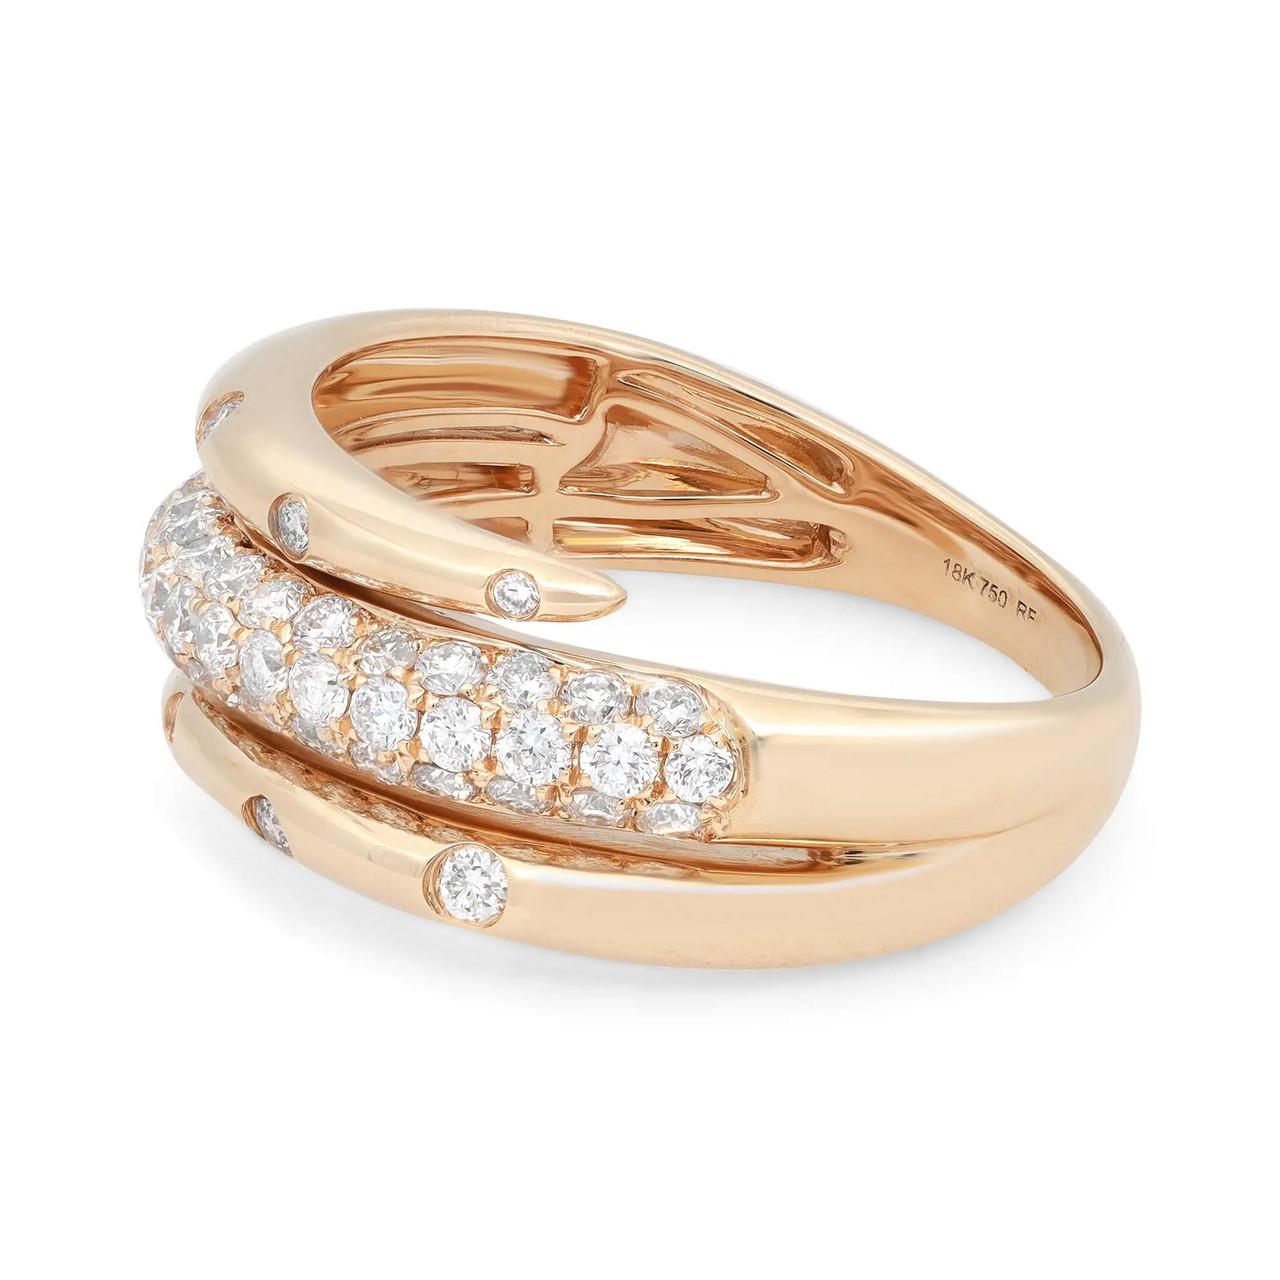 Introducing our stunning 0.78 Carat Diamond Spiral Ring in 18K Yellow Gold. This exquisite piece showcases a captivating spiral design crafted in 18K yellow gold, adorned with a sparkling pavé of diamonds at the face. The combination of the